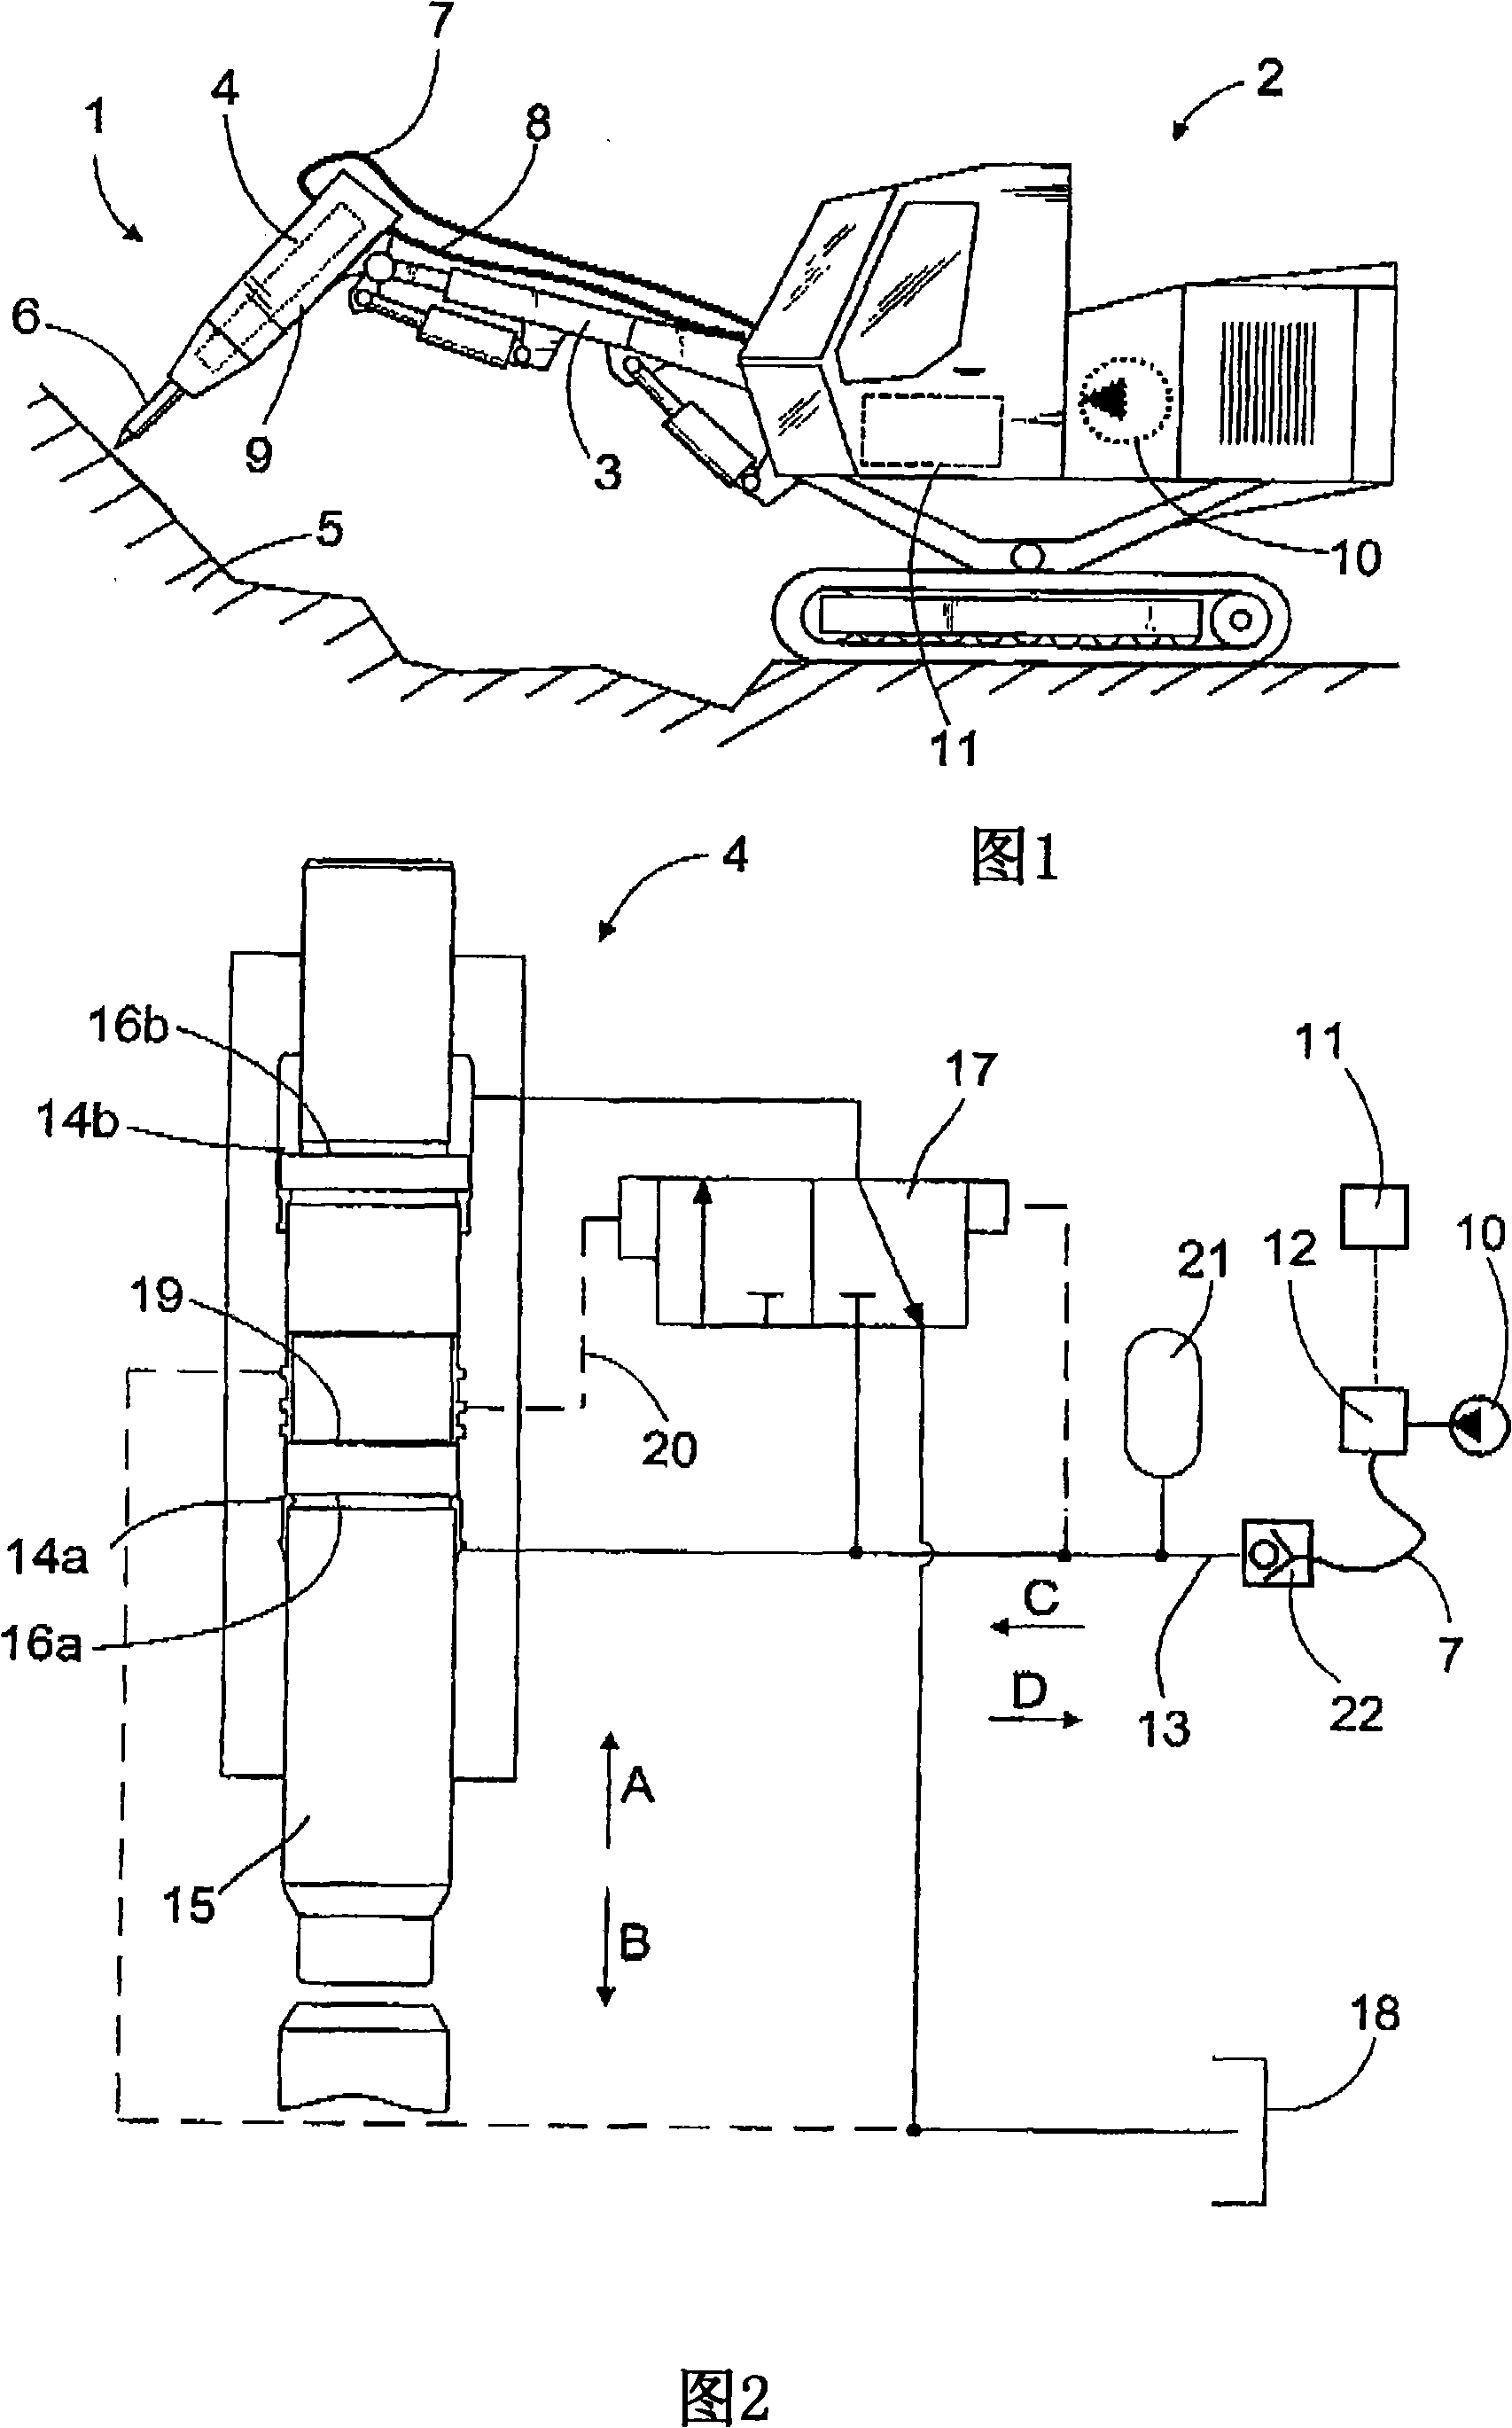 Rock breaking device, protection valve and a method of operating a rock breaking device